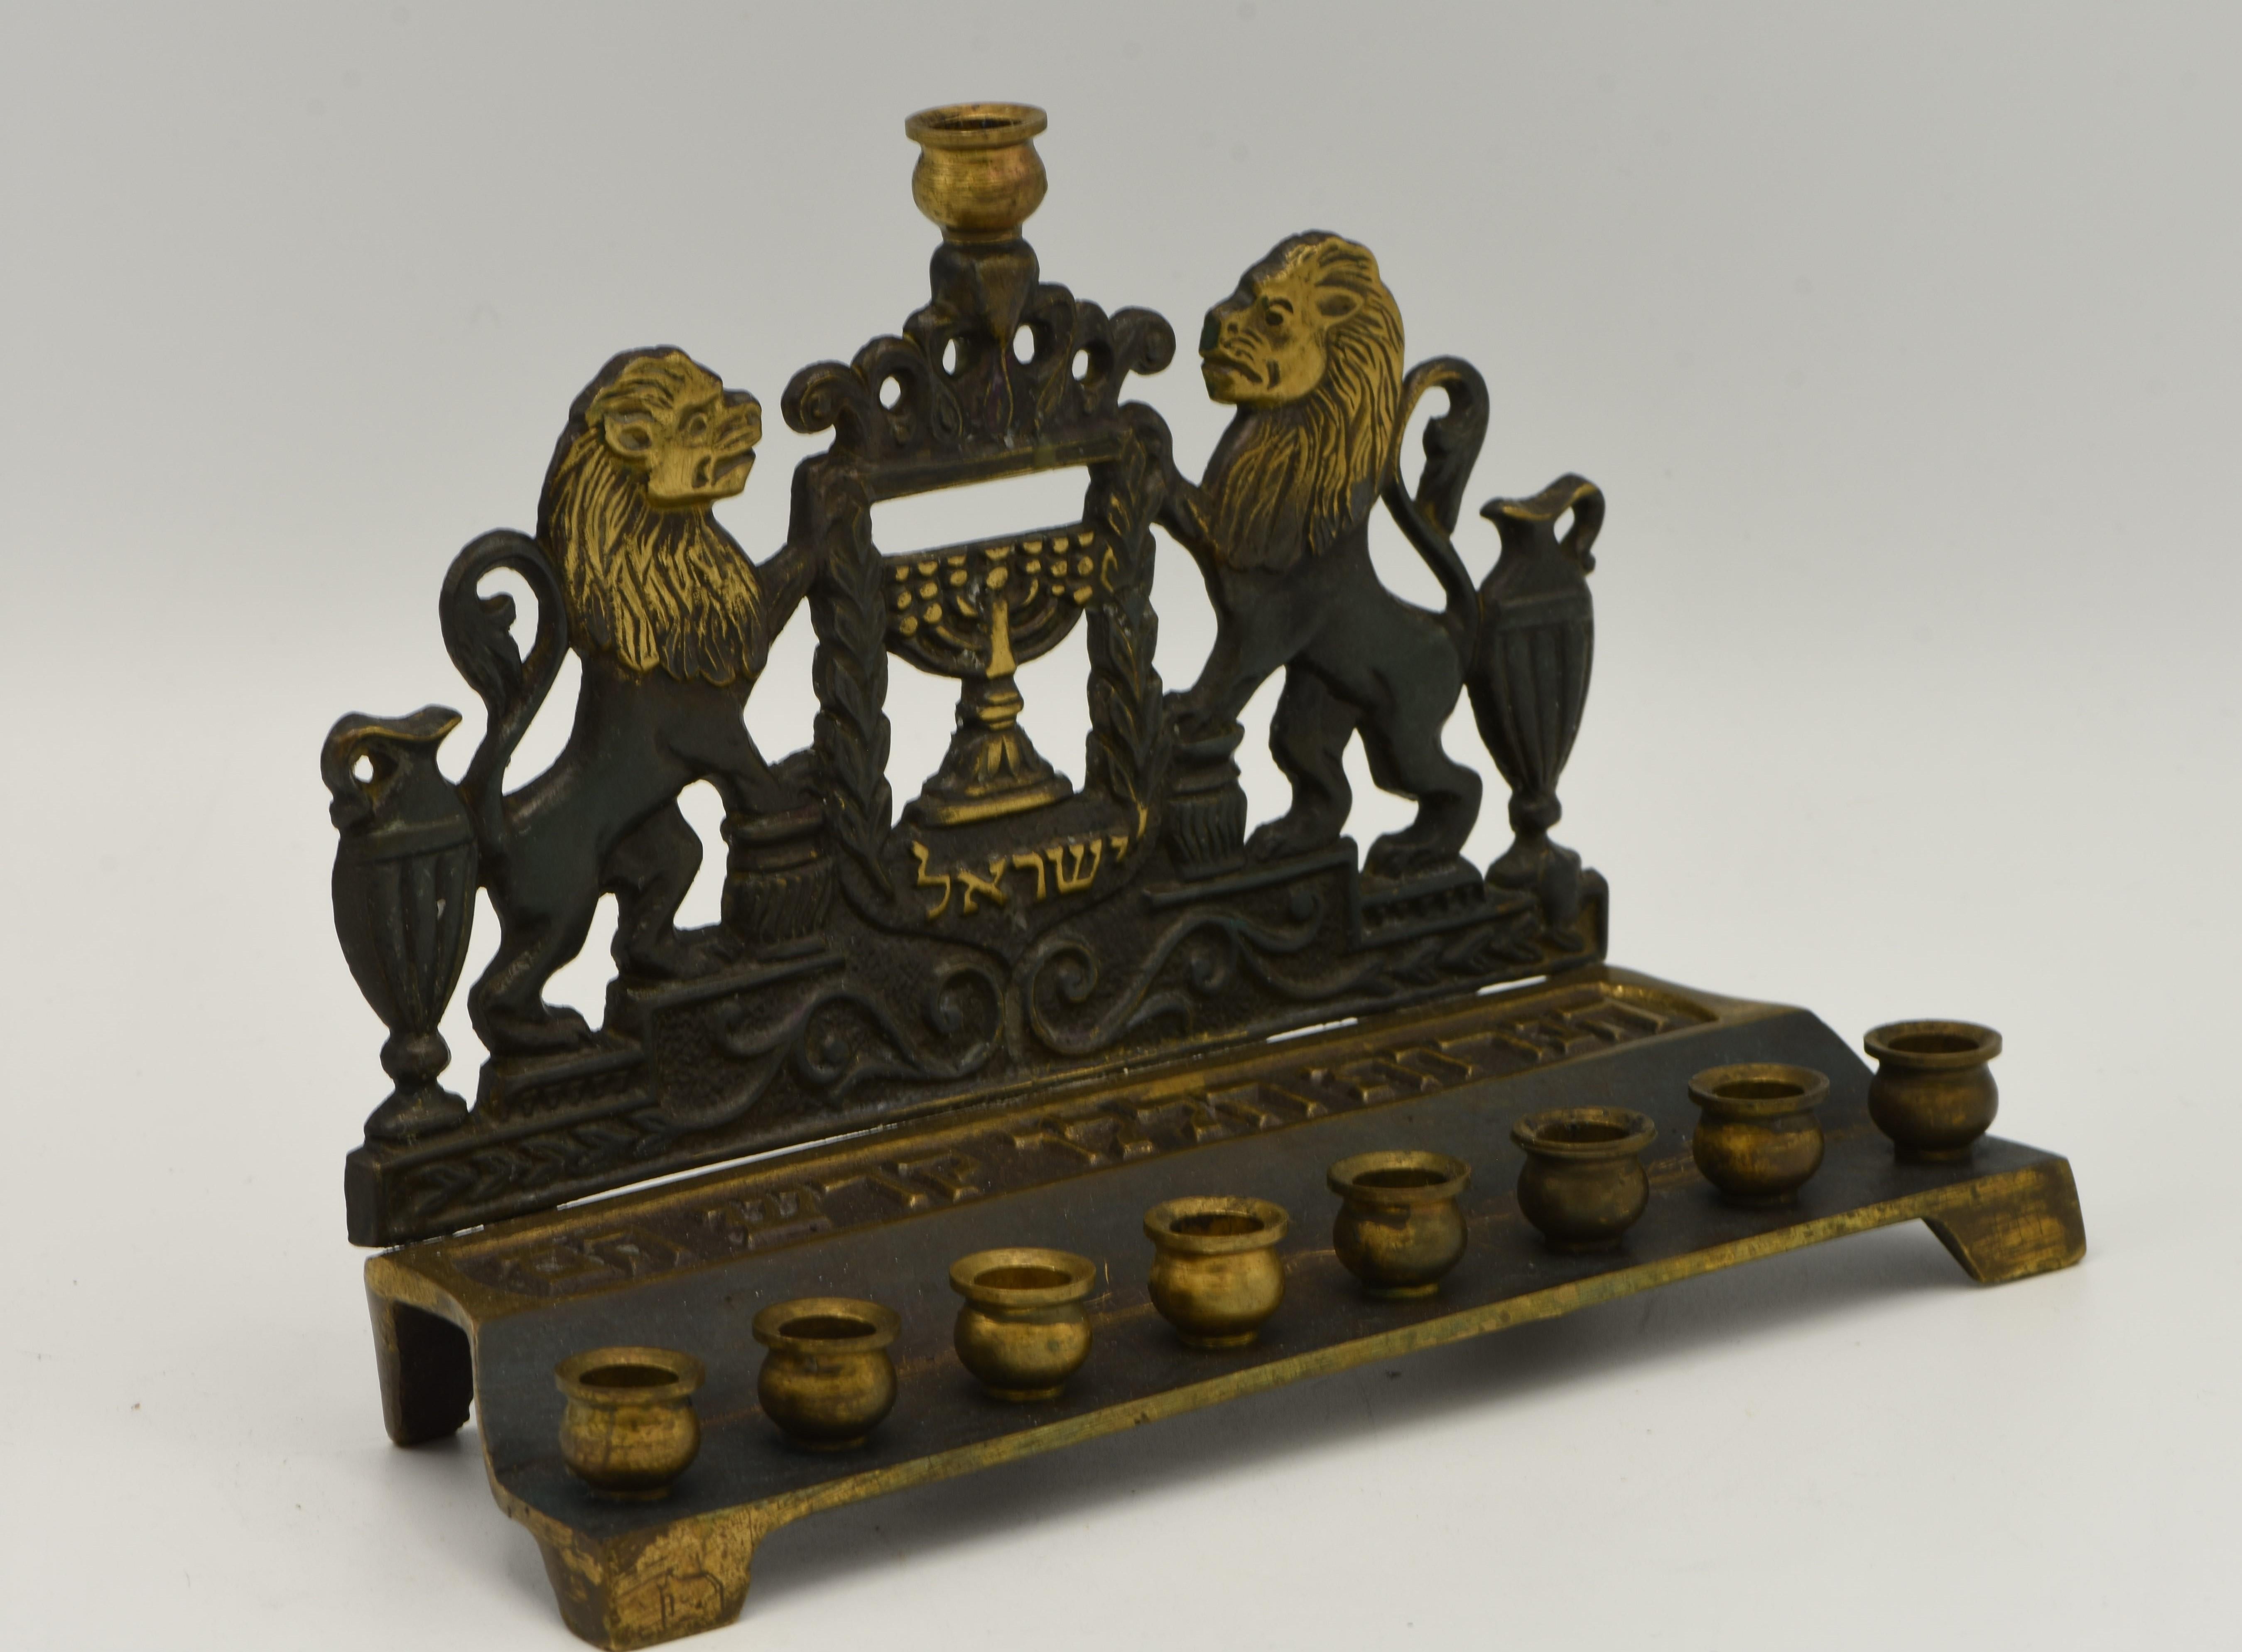 Cast brass Hanukkah lamp menorah, Israel, circa 1950. 
In a green patina finish. The Hanukkah lamp depicts two lions with two oil jugs holding the state of Israel symbol, seven branch menorah with olive branches. Marked on the bottom 